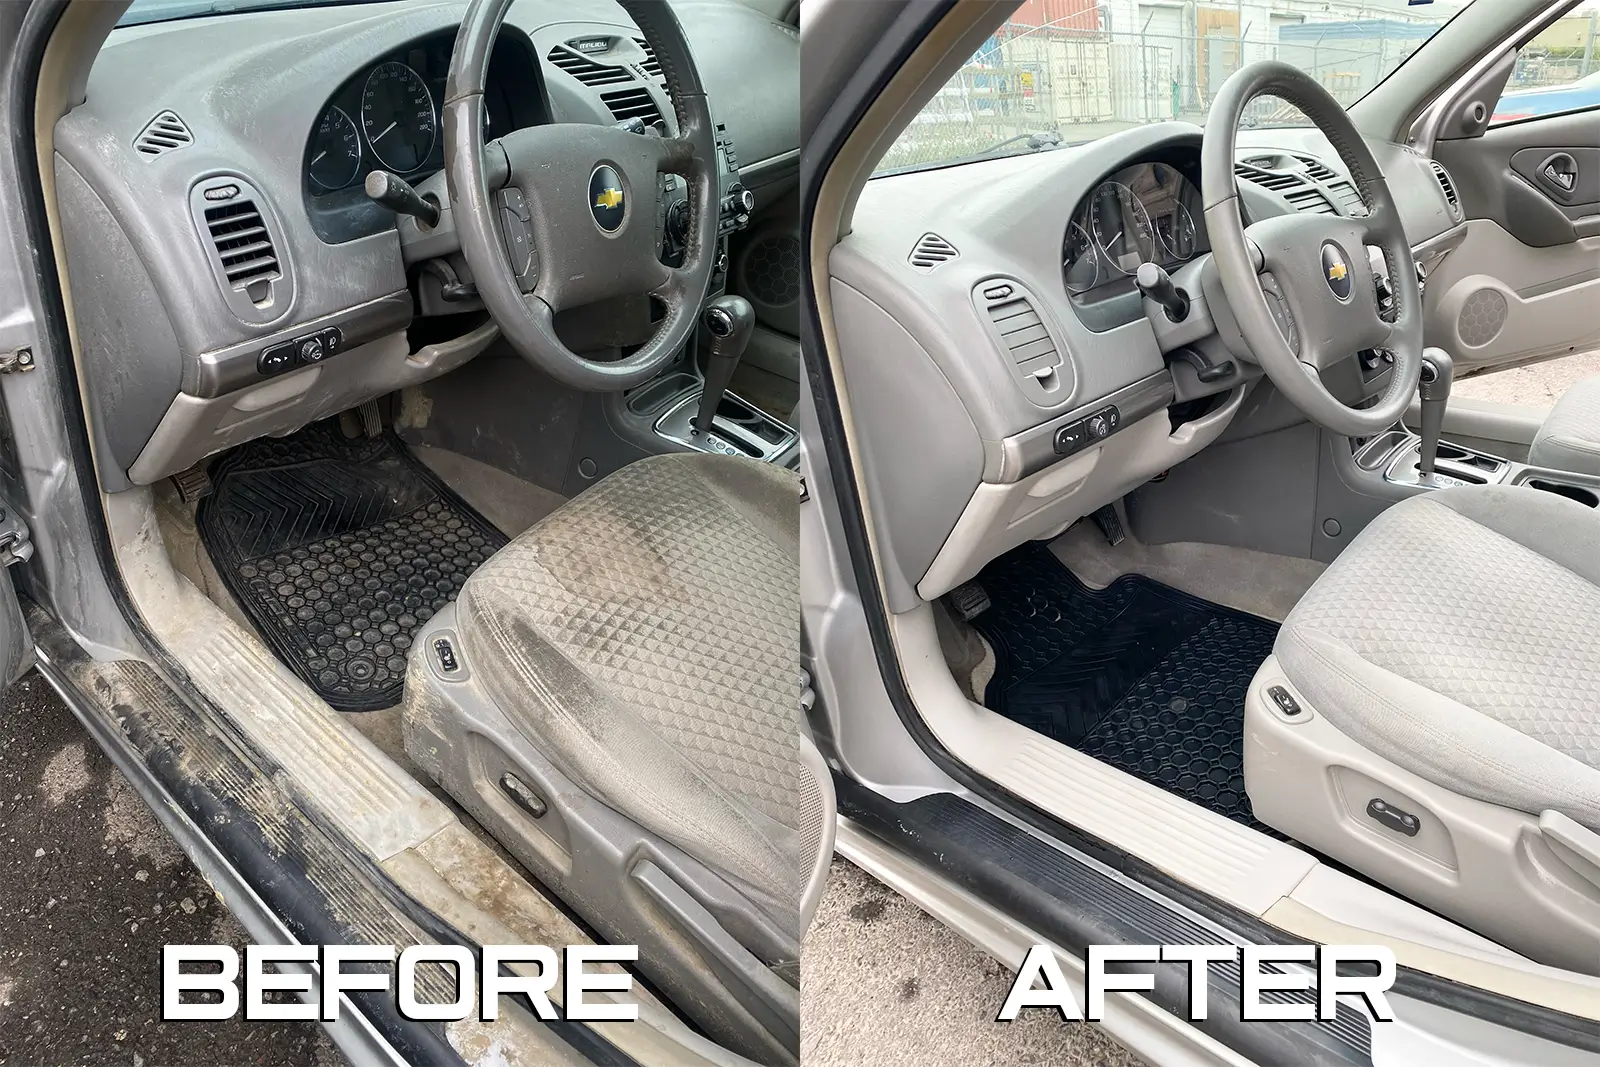 interior of dirty white car before and after washing - Calgary auto detailers